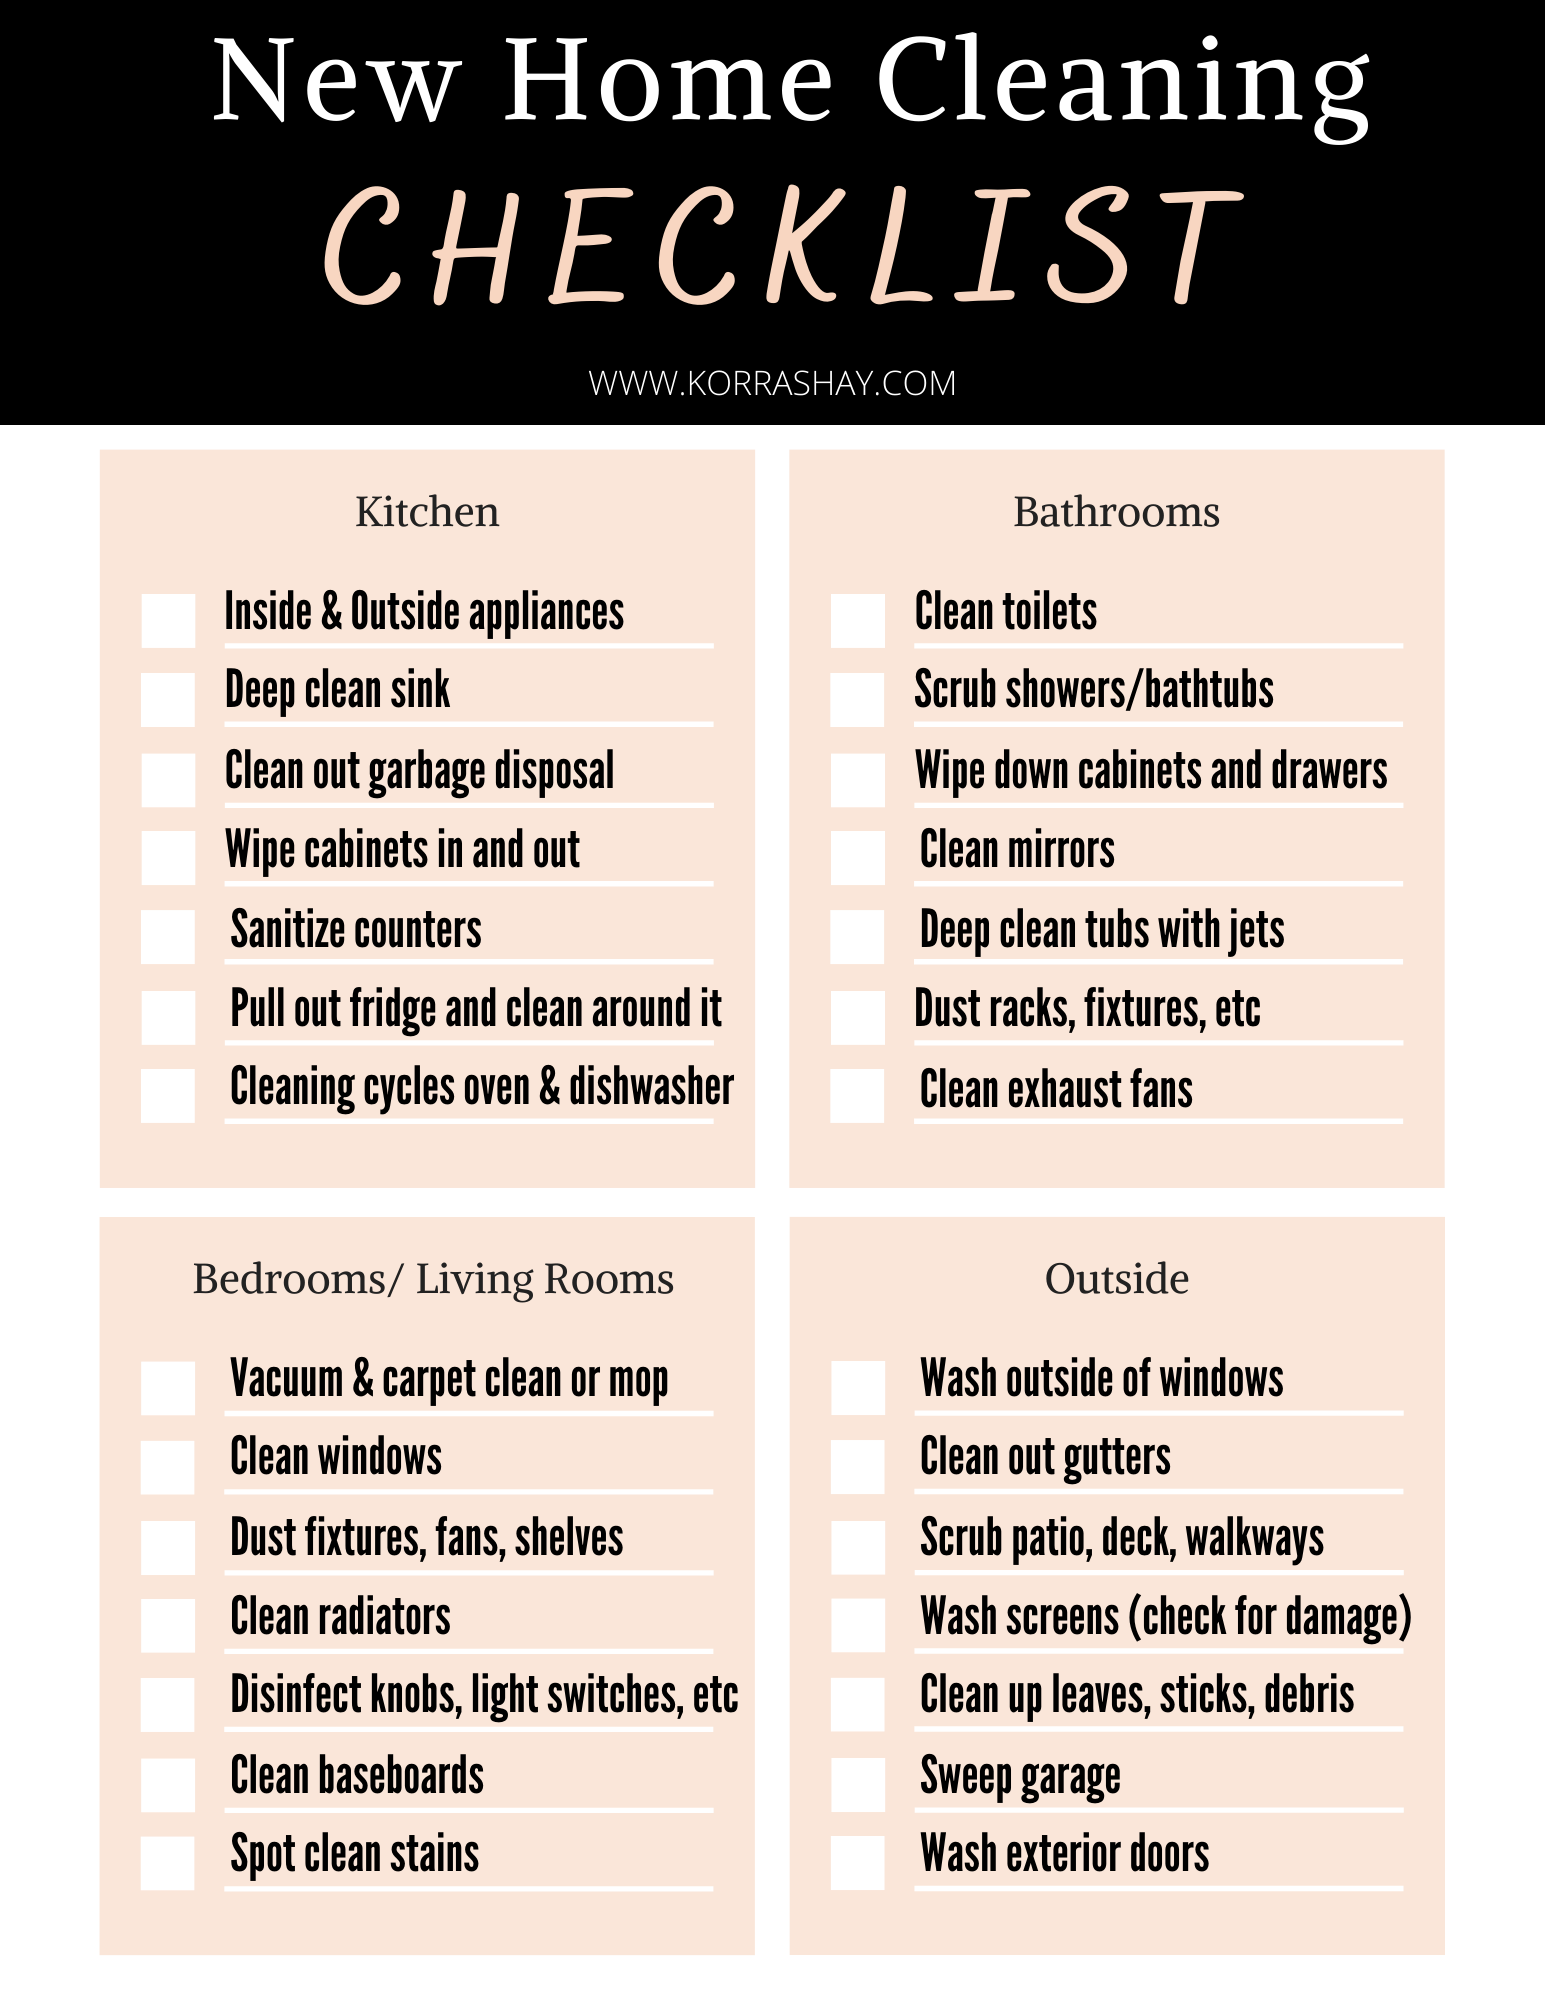 https://korrashay.com/wp-content/uploads/2021/04/New-Home-Cleaning-Checklist.png